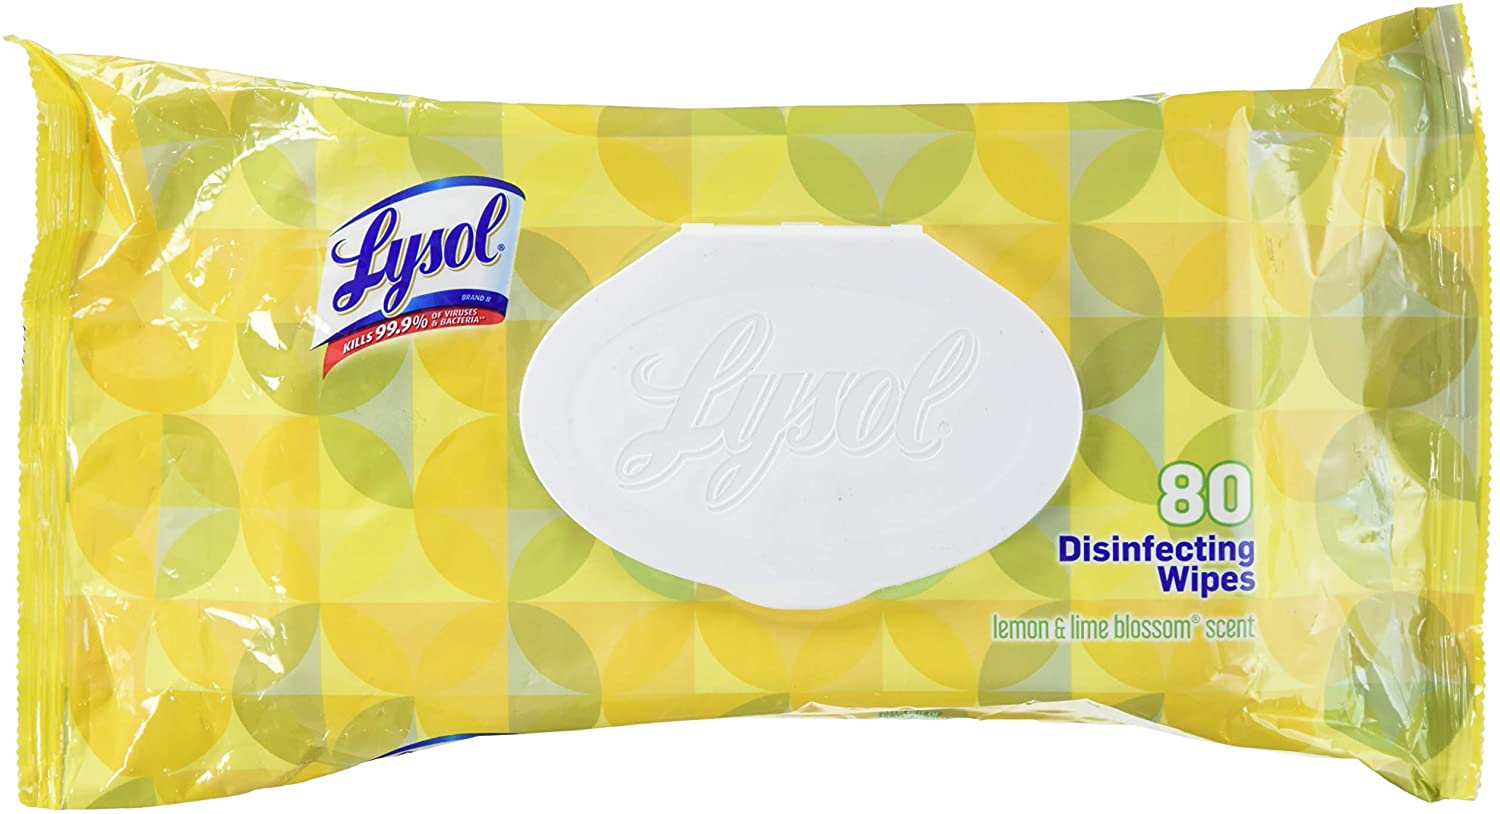 Lysol Brand Disinfecting Wipes Flatpack. 80 ct - Lemon & Lime Blossom (ea)